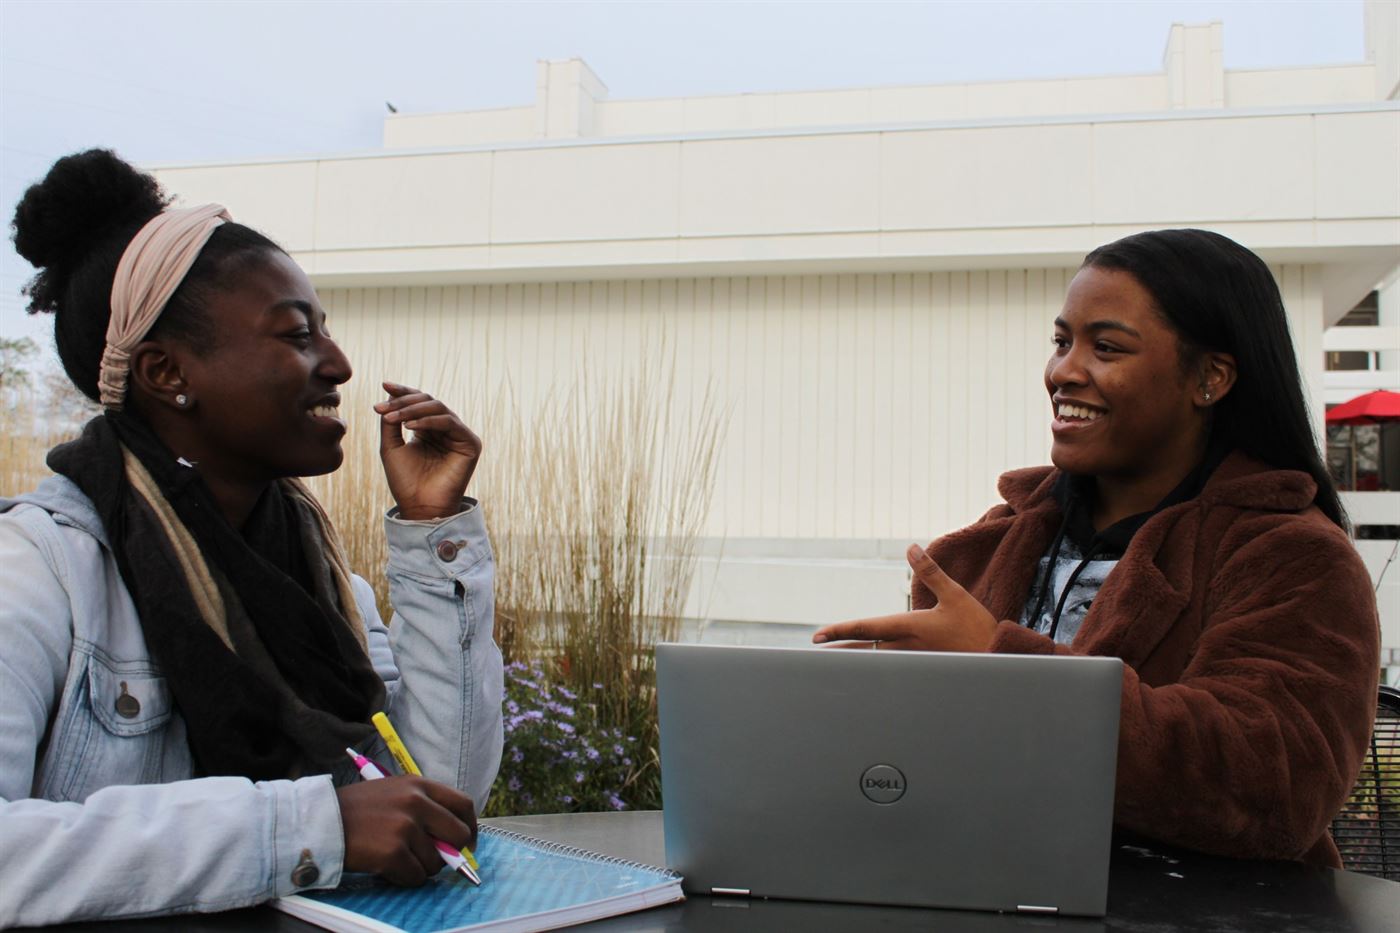 Accounting major Nyla Egerton (left) and medical humanities major Detrah Bowman (right), both freshman, sat down to talk about the gubernatorial election. Avery Nixon | The Montclarion